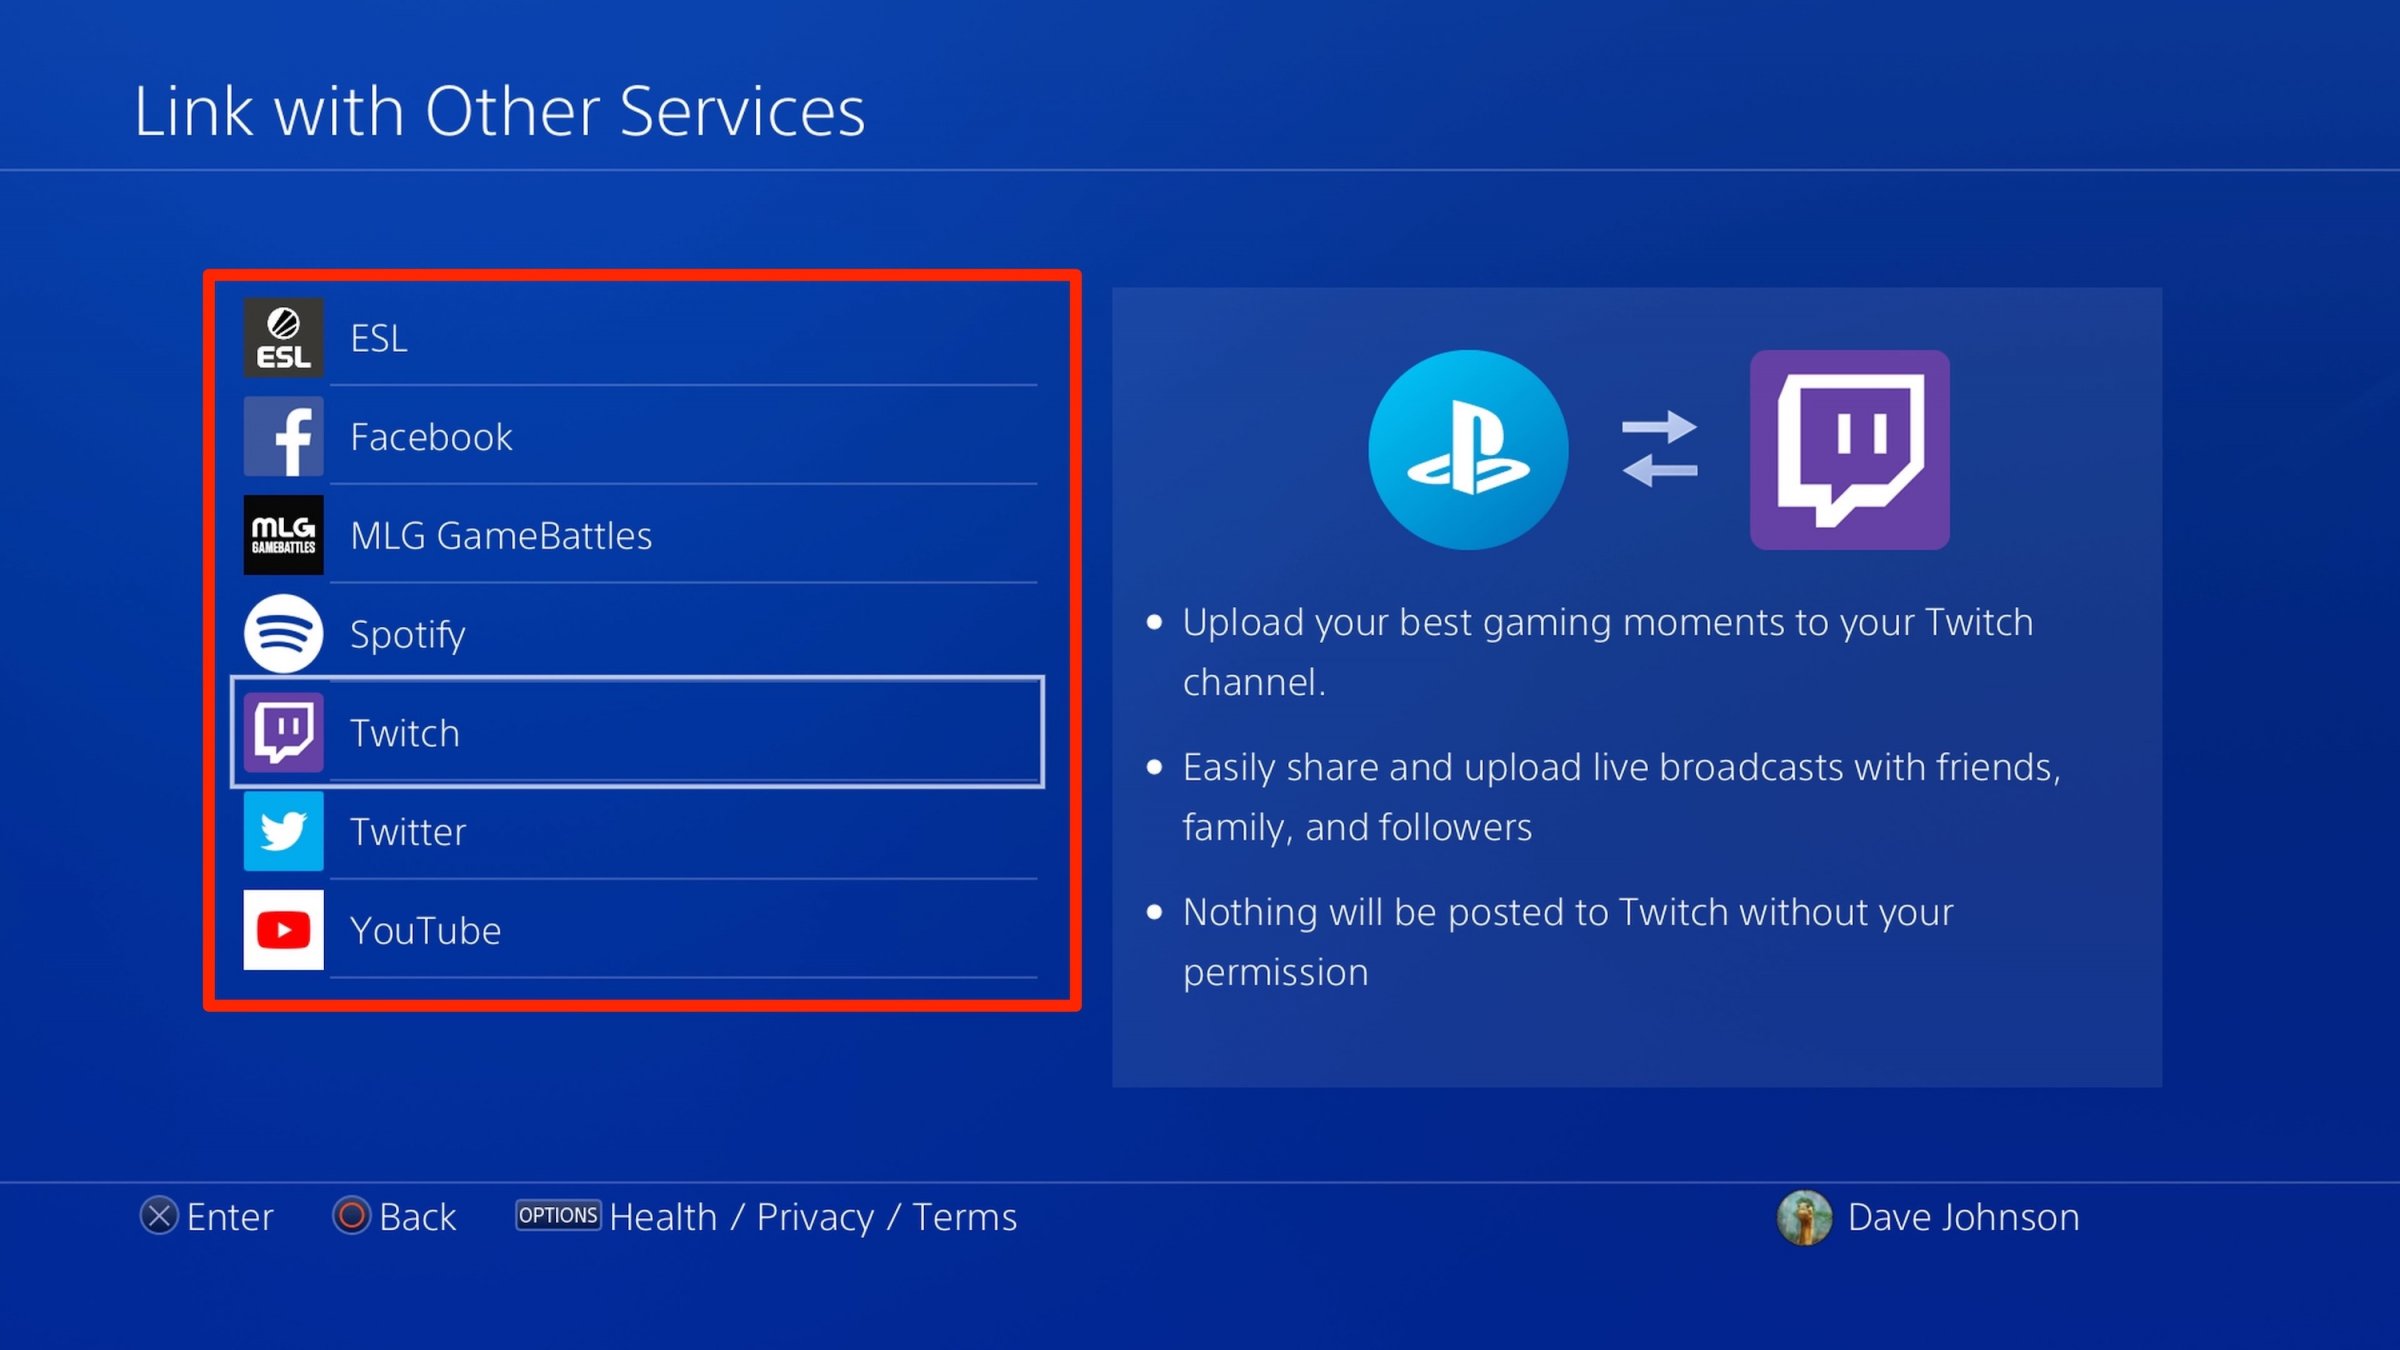 To link your Twitch or YouTube account to the PS4, start in Settings